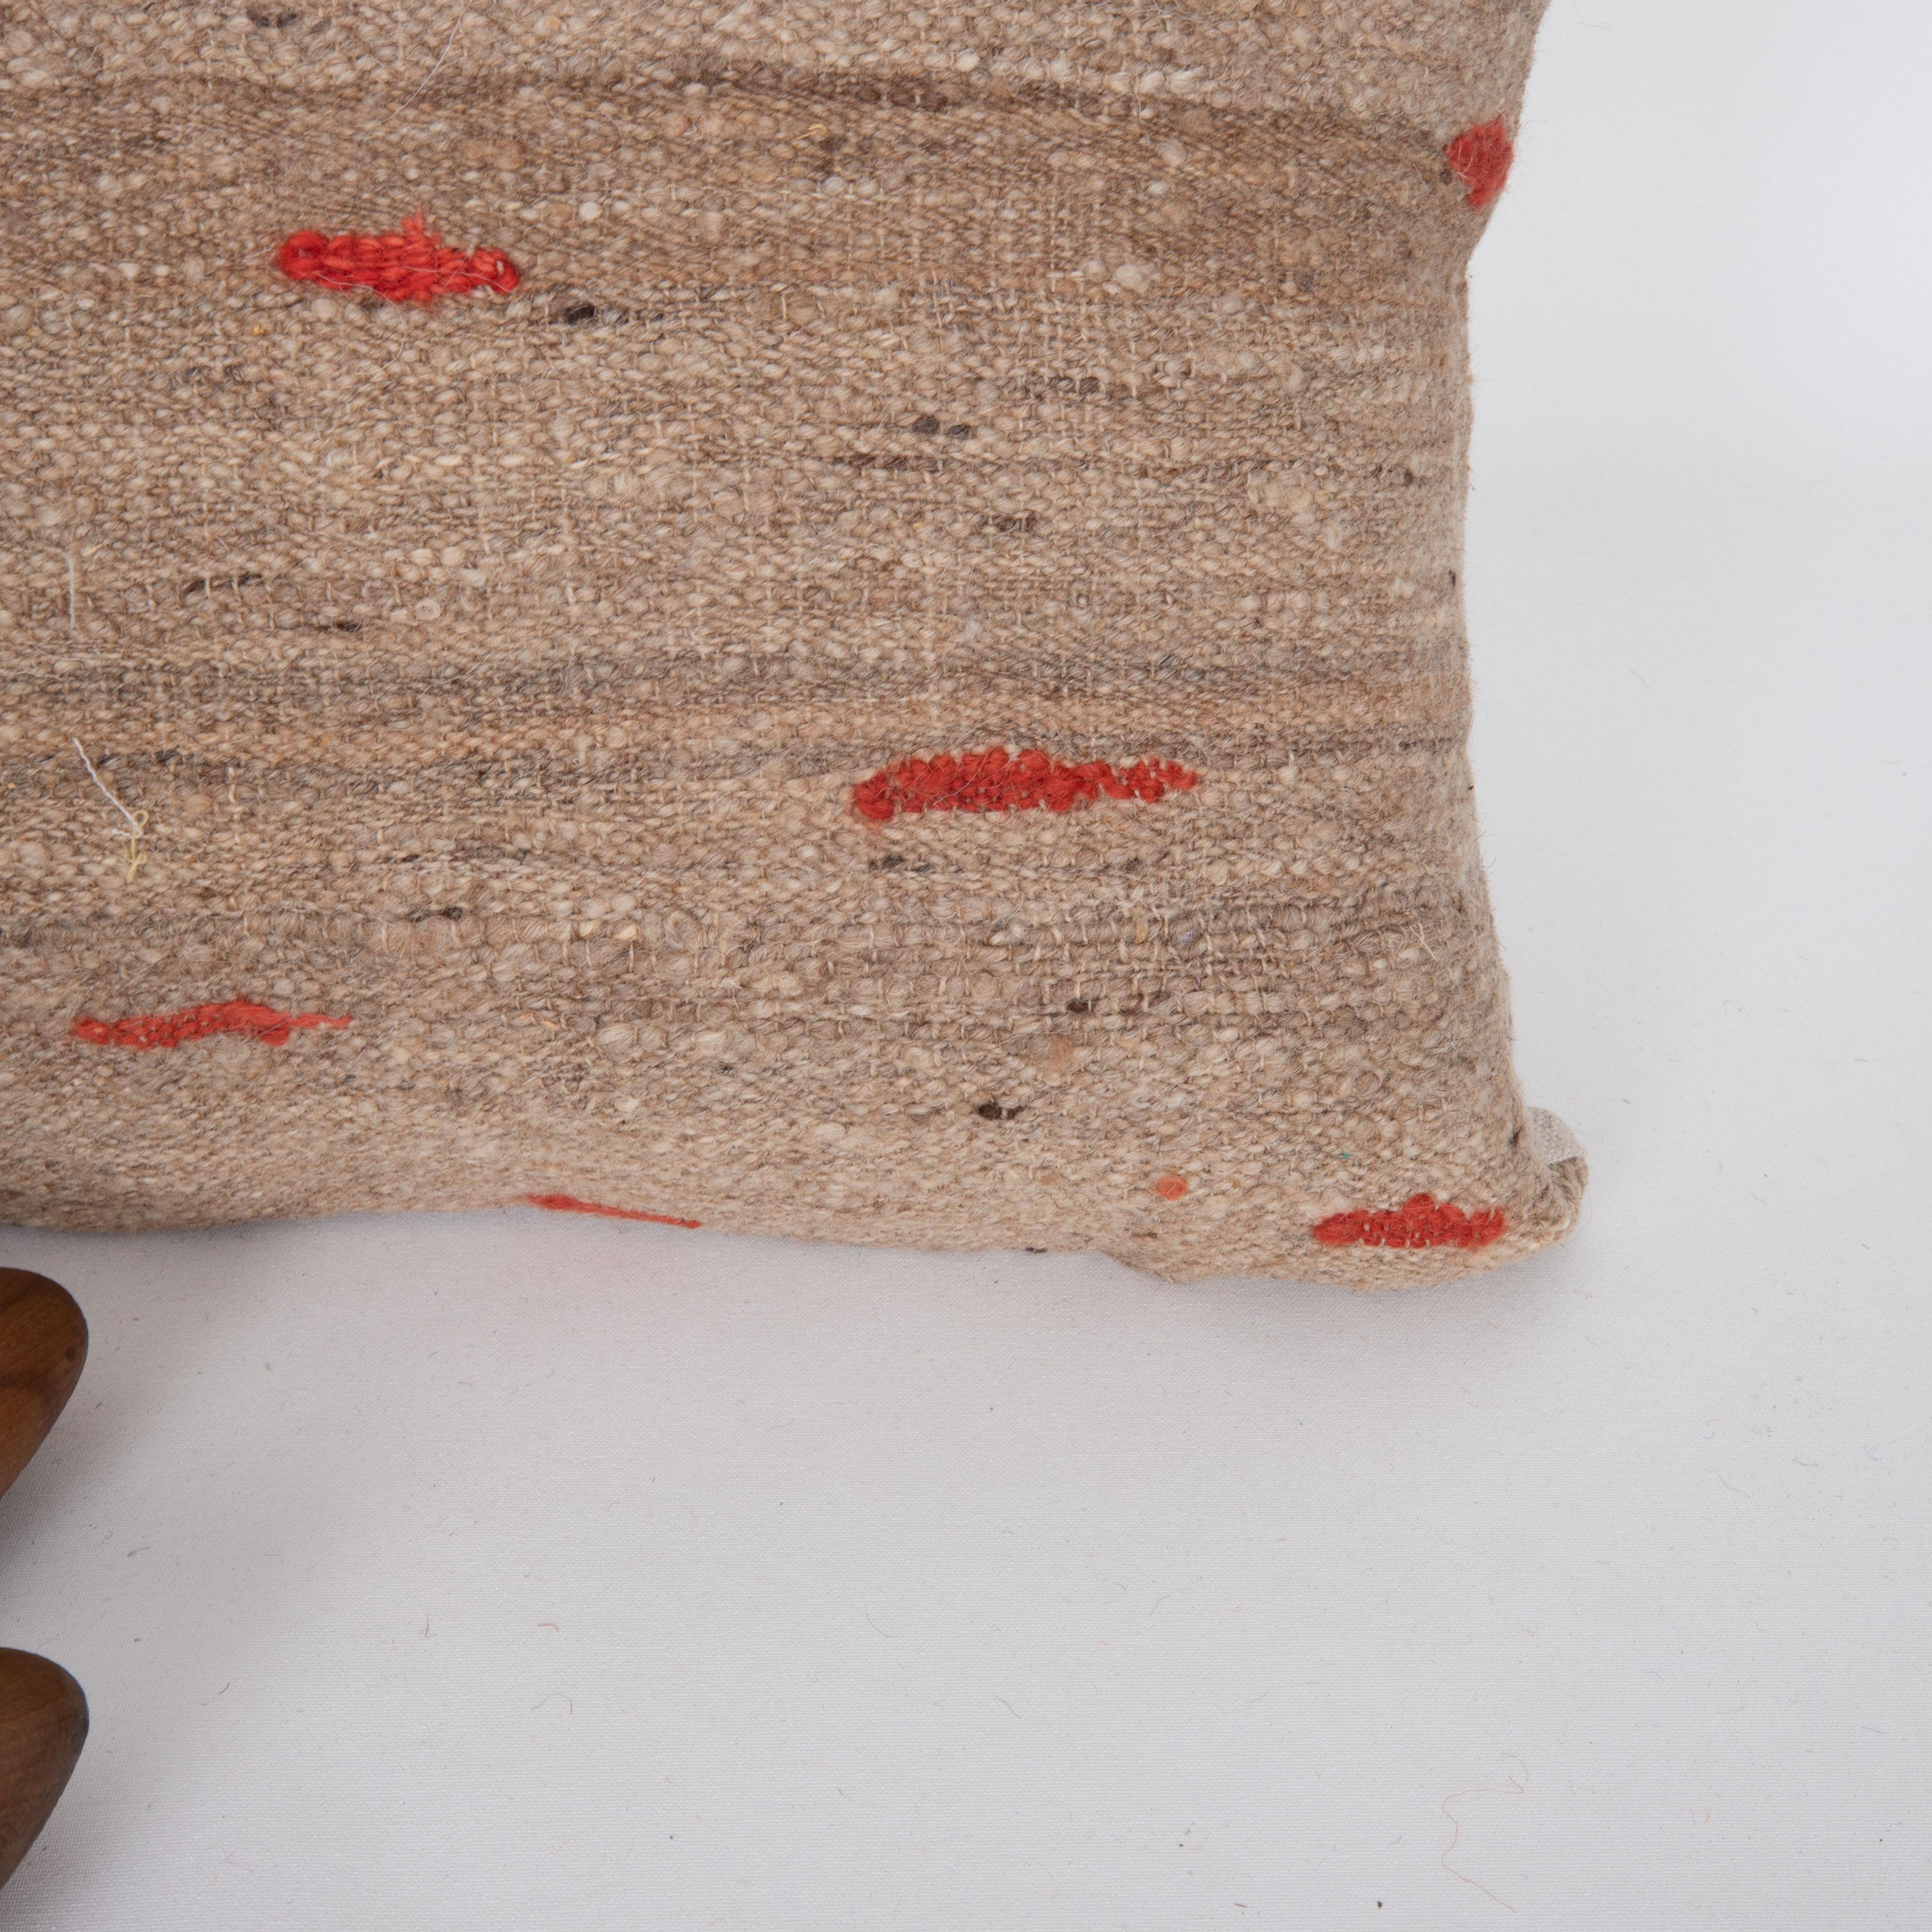 Hand-Woven Pillow Case Made from a Vintage Flatweave For Sale